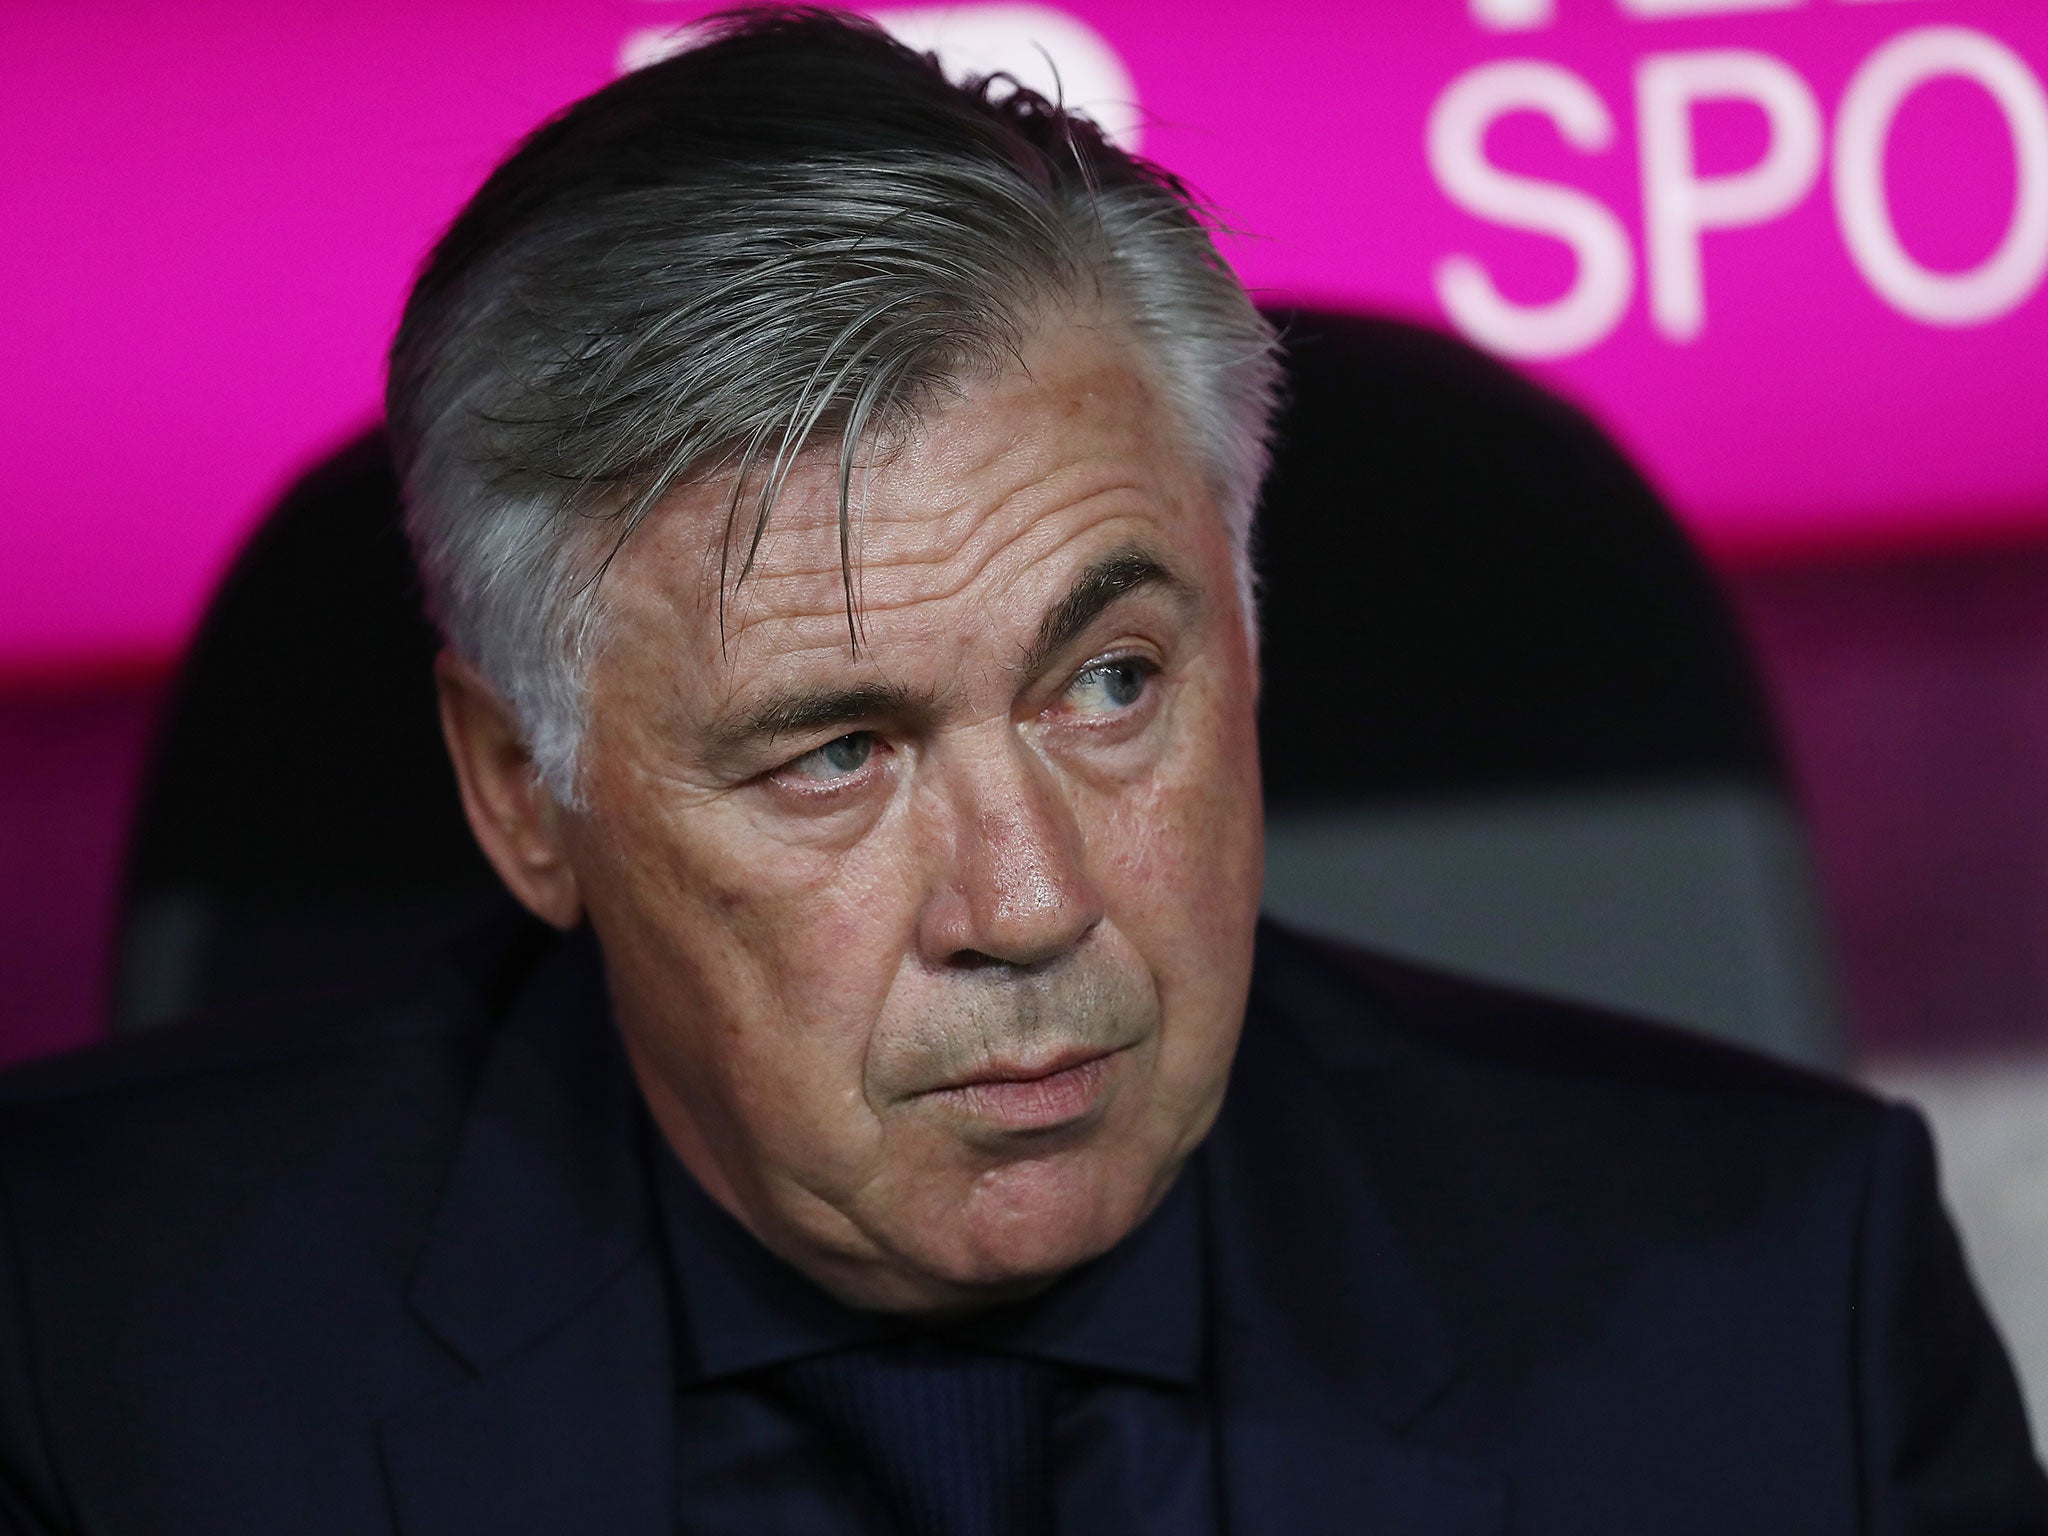 Carlo Ancelotti joked that he would be acting immediately to secure the Swede’s signature